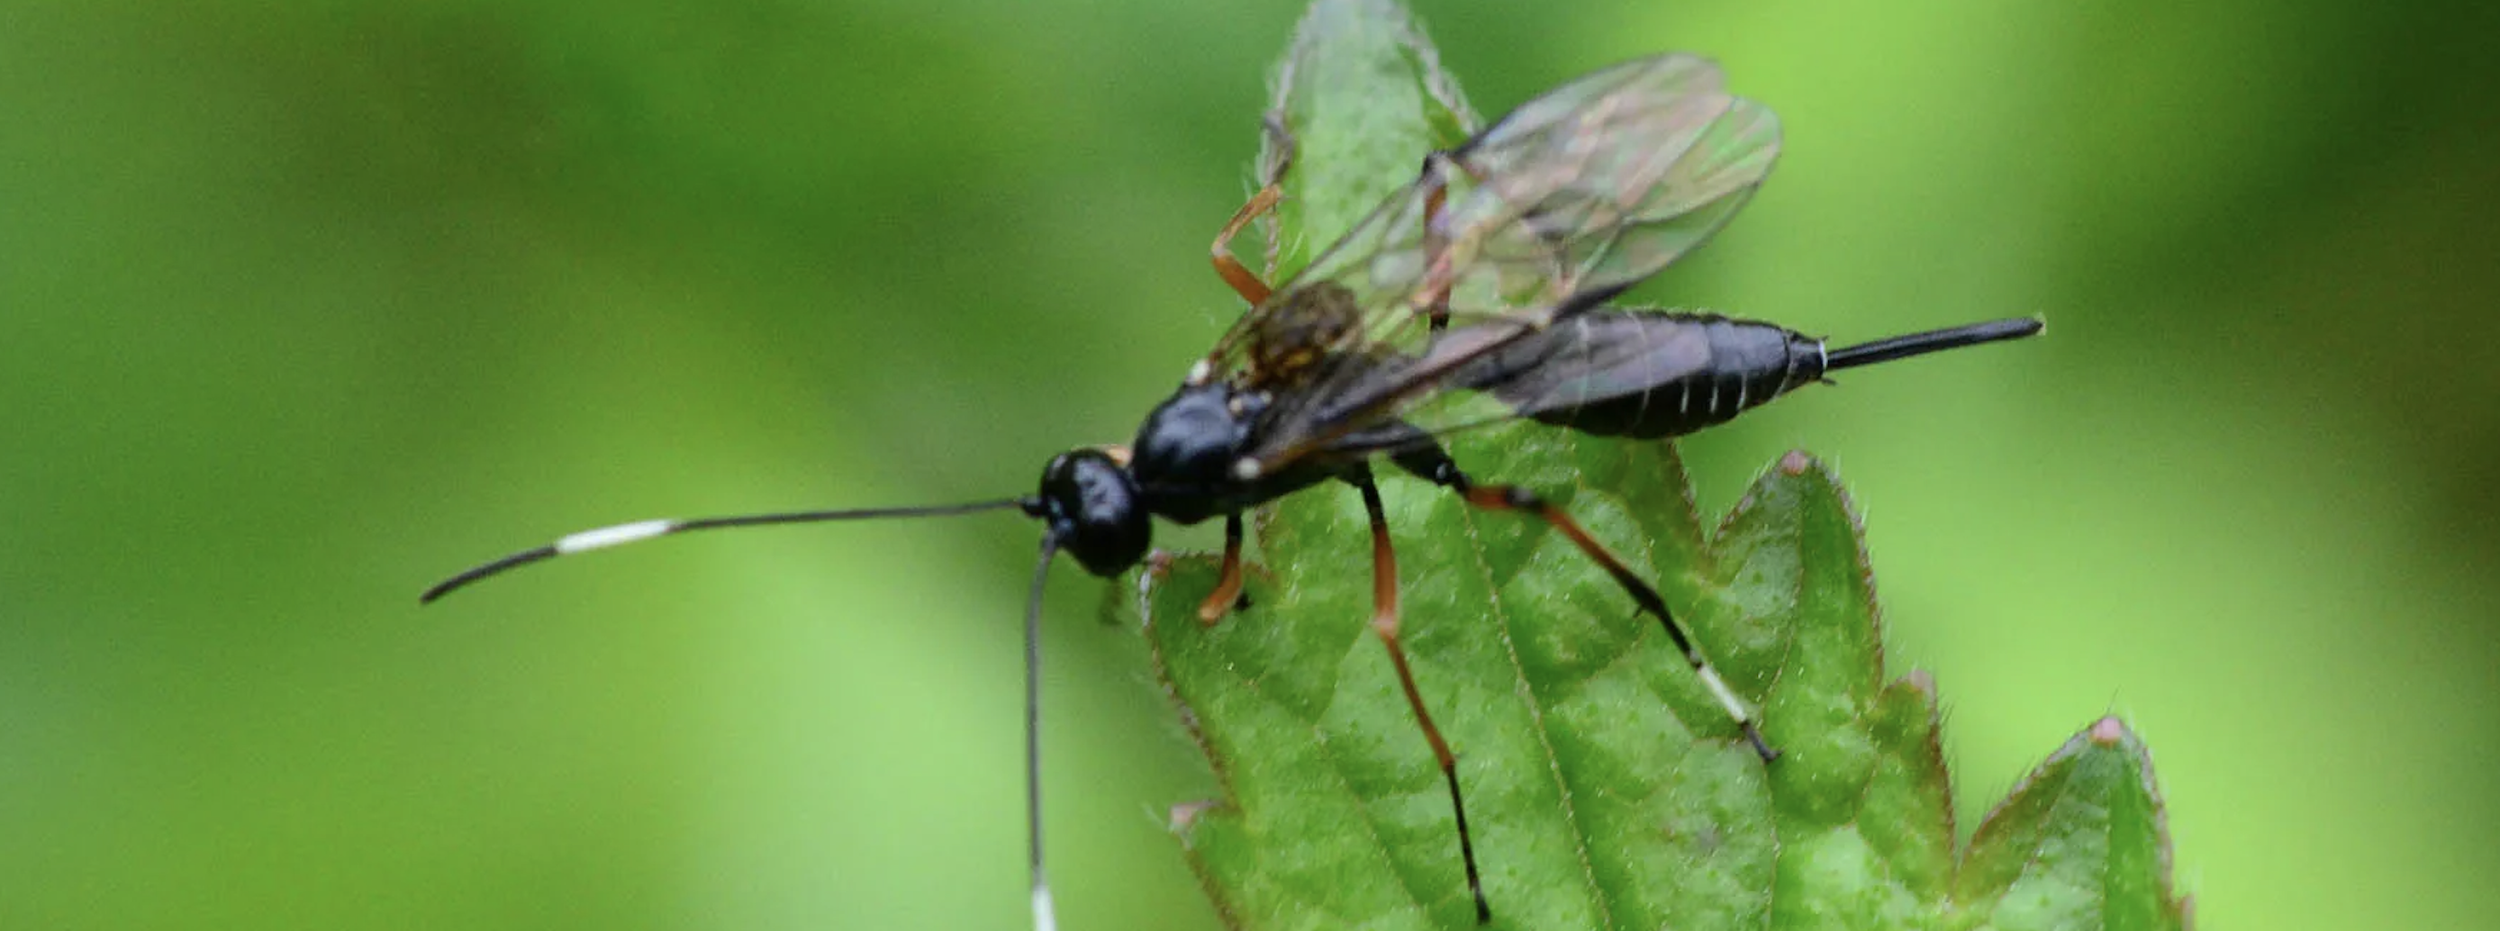 Parasitic Aphid Wasp